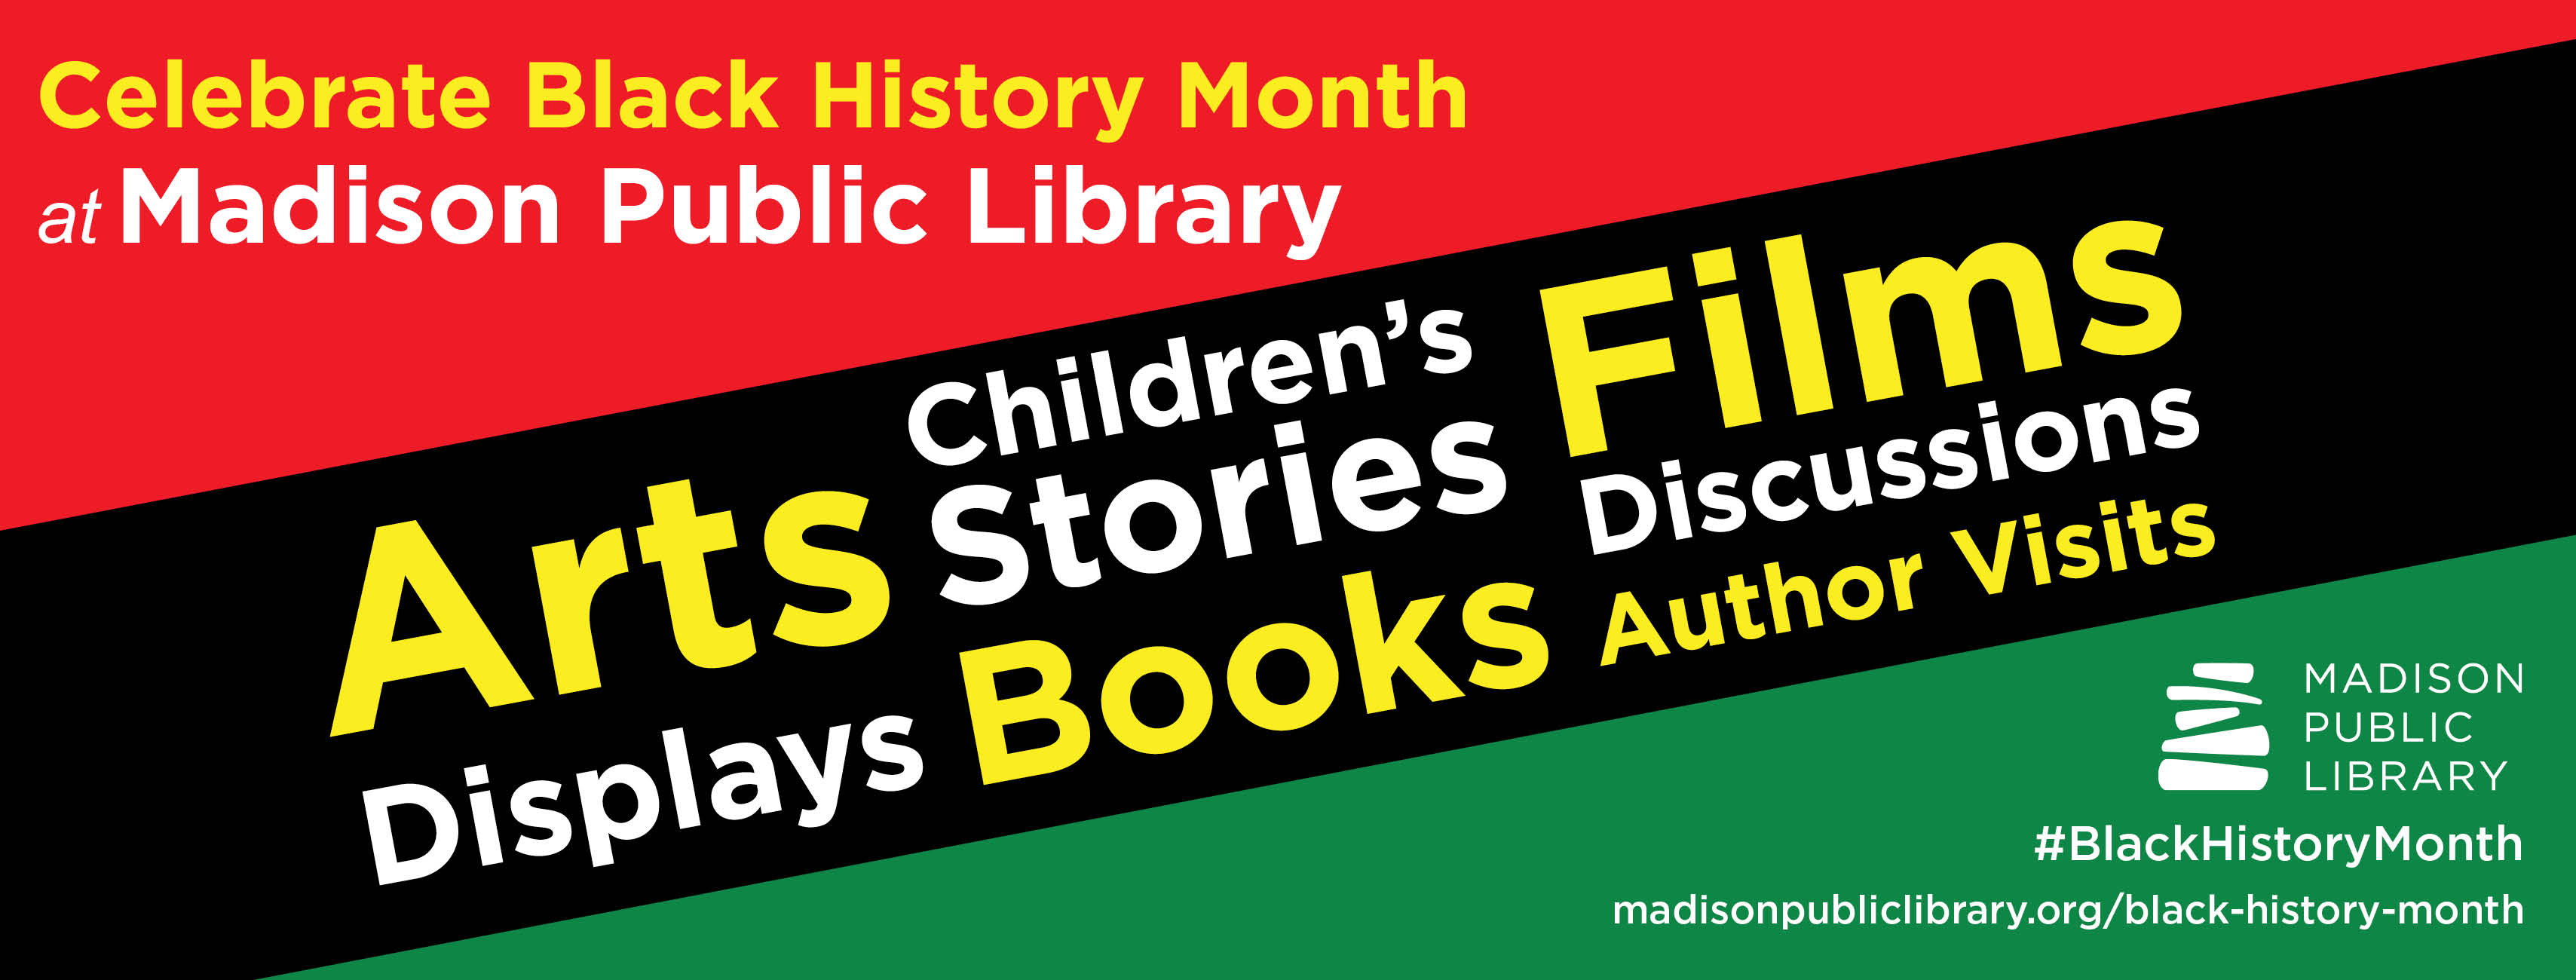 Celebrate Black History Month at Madison Public Library. Arts displays. Children's stories. Books. Films. Discussions. Author visits.